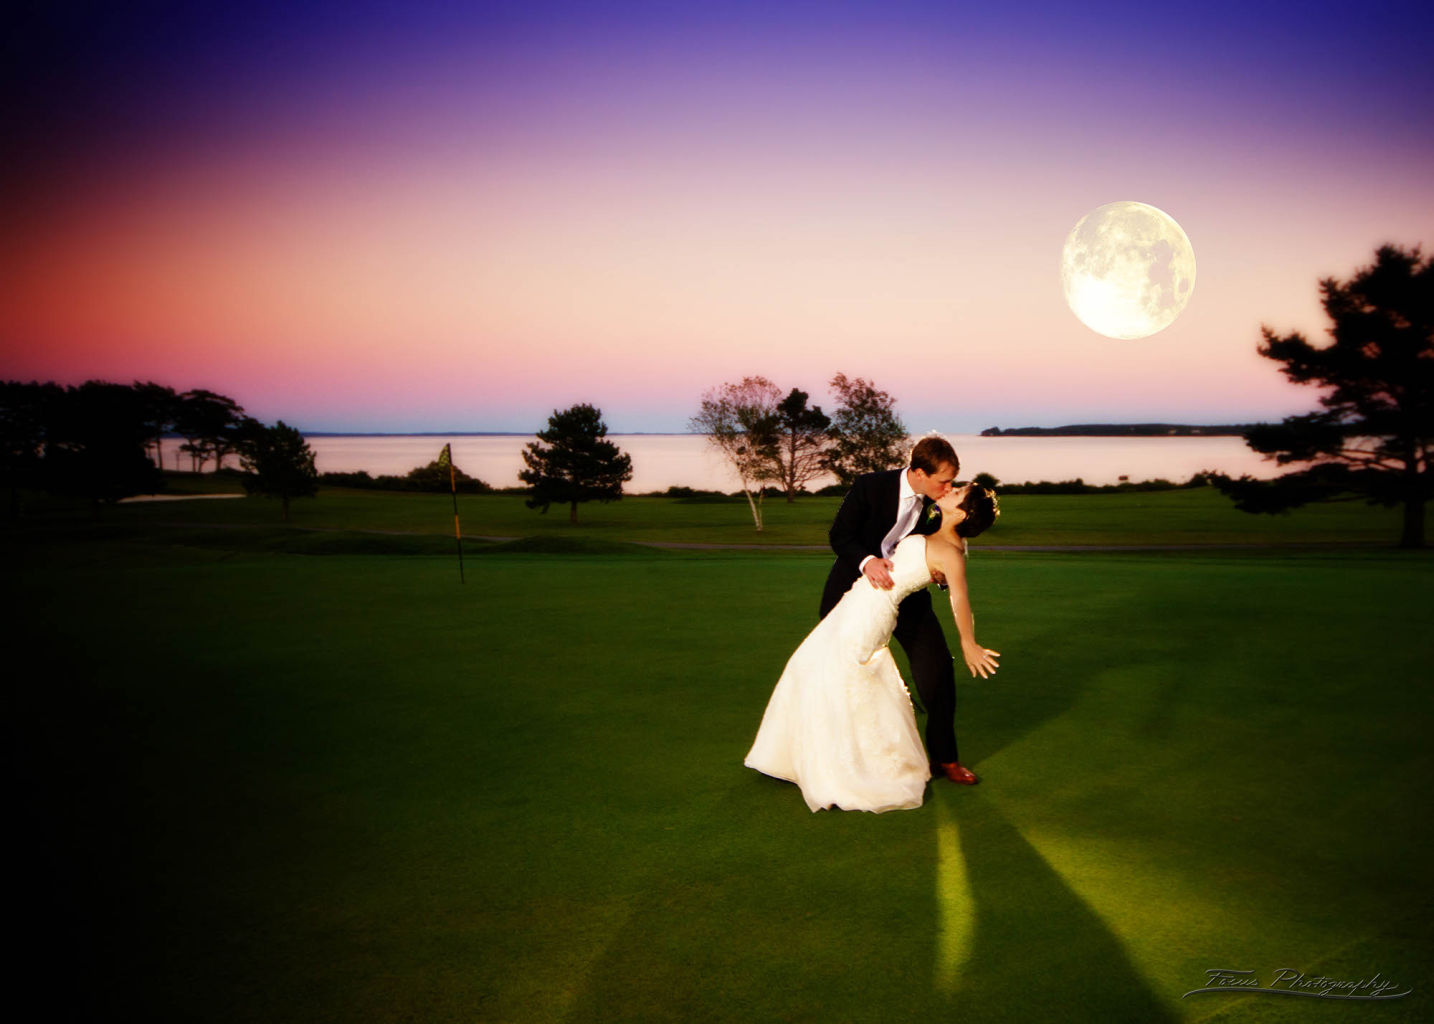 The bride and groom dance in the moonlight at the Samoset Resort